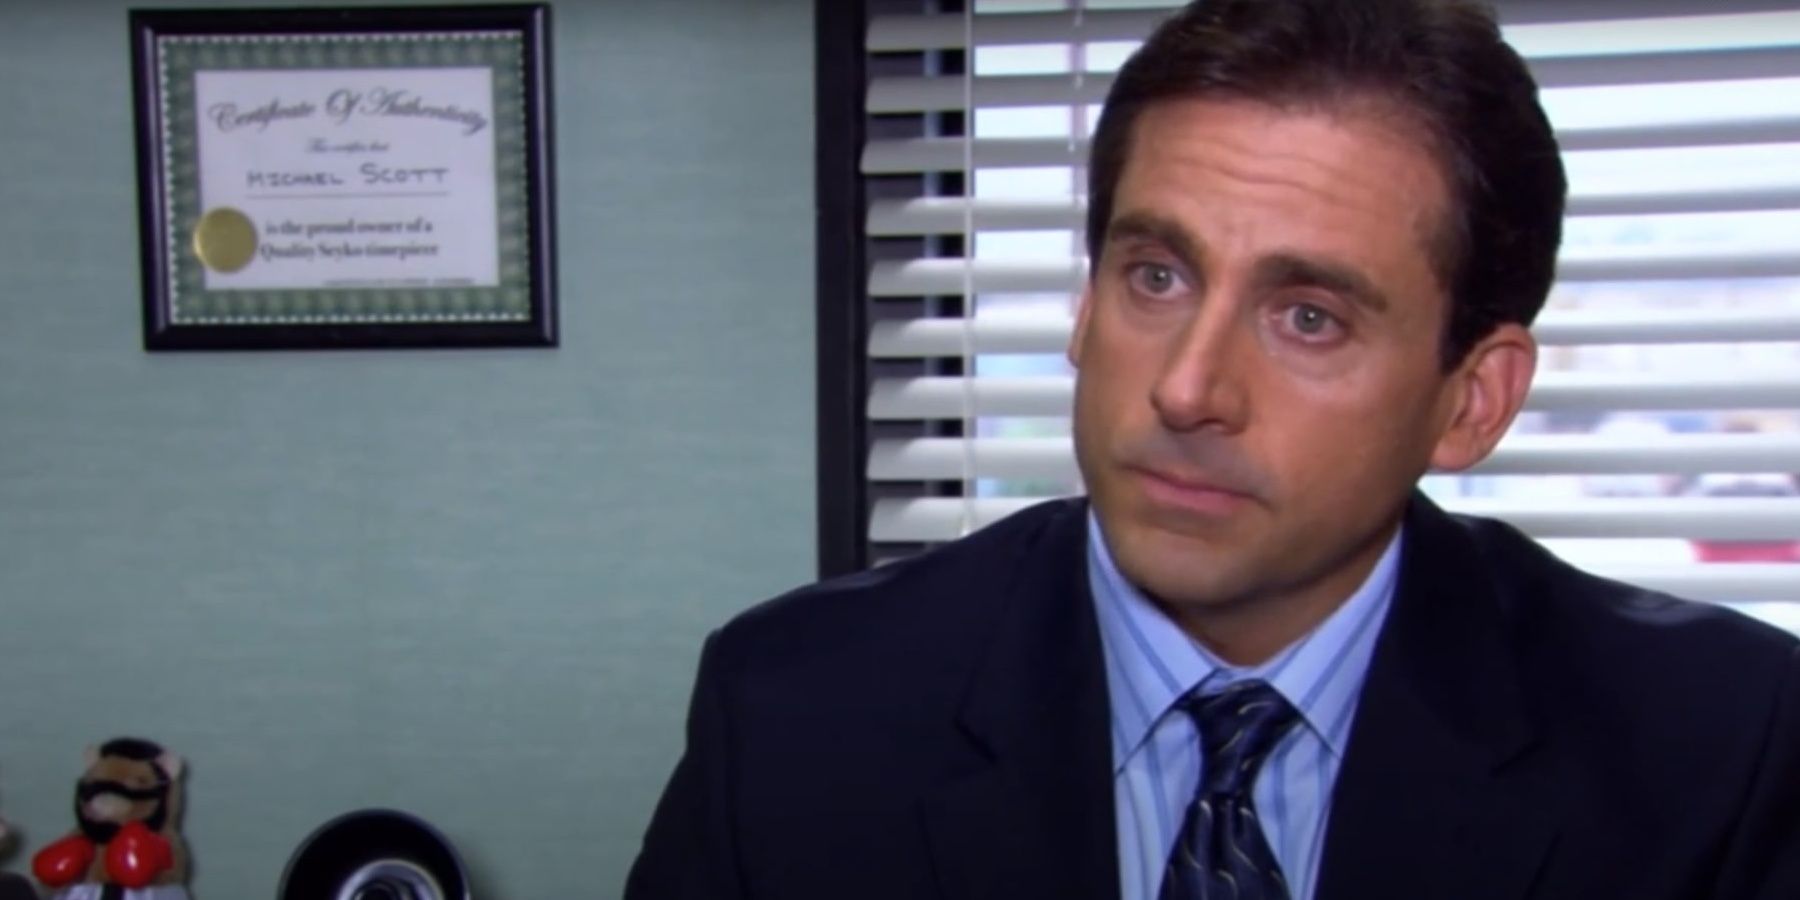 An upset Michael stares at the camera in The Office